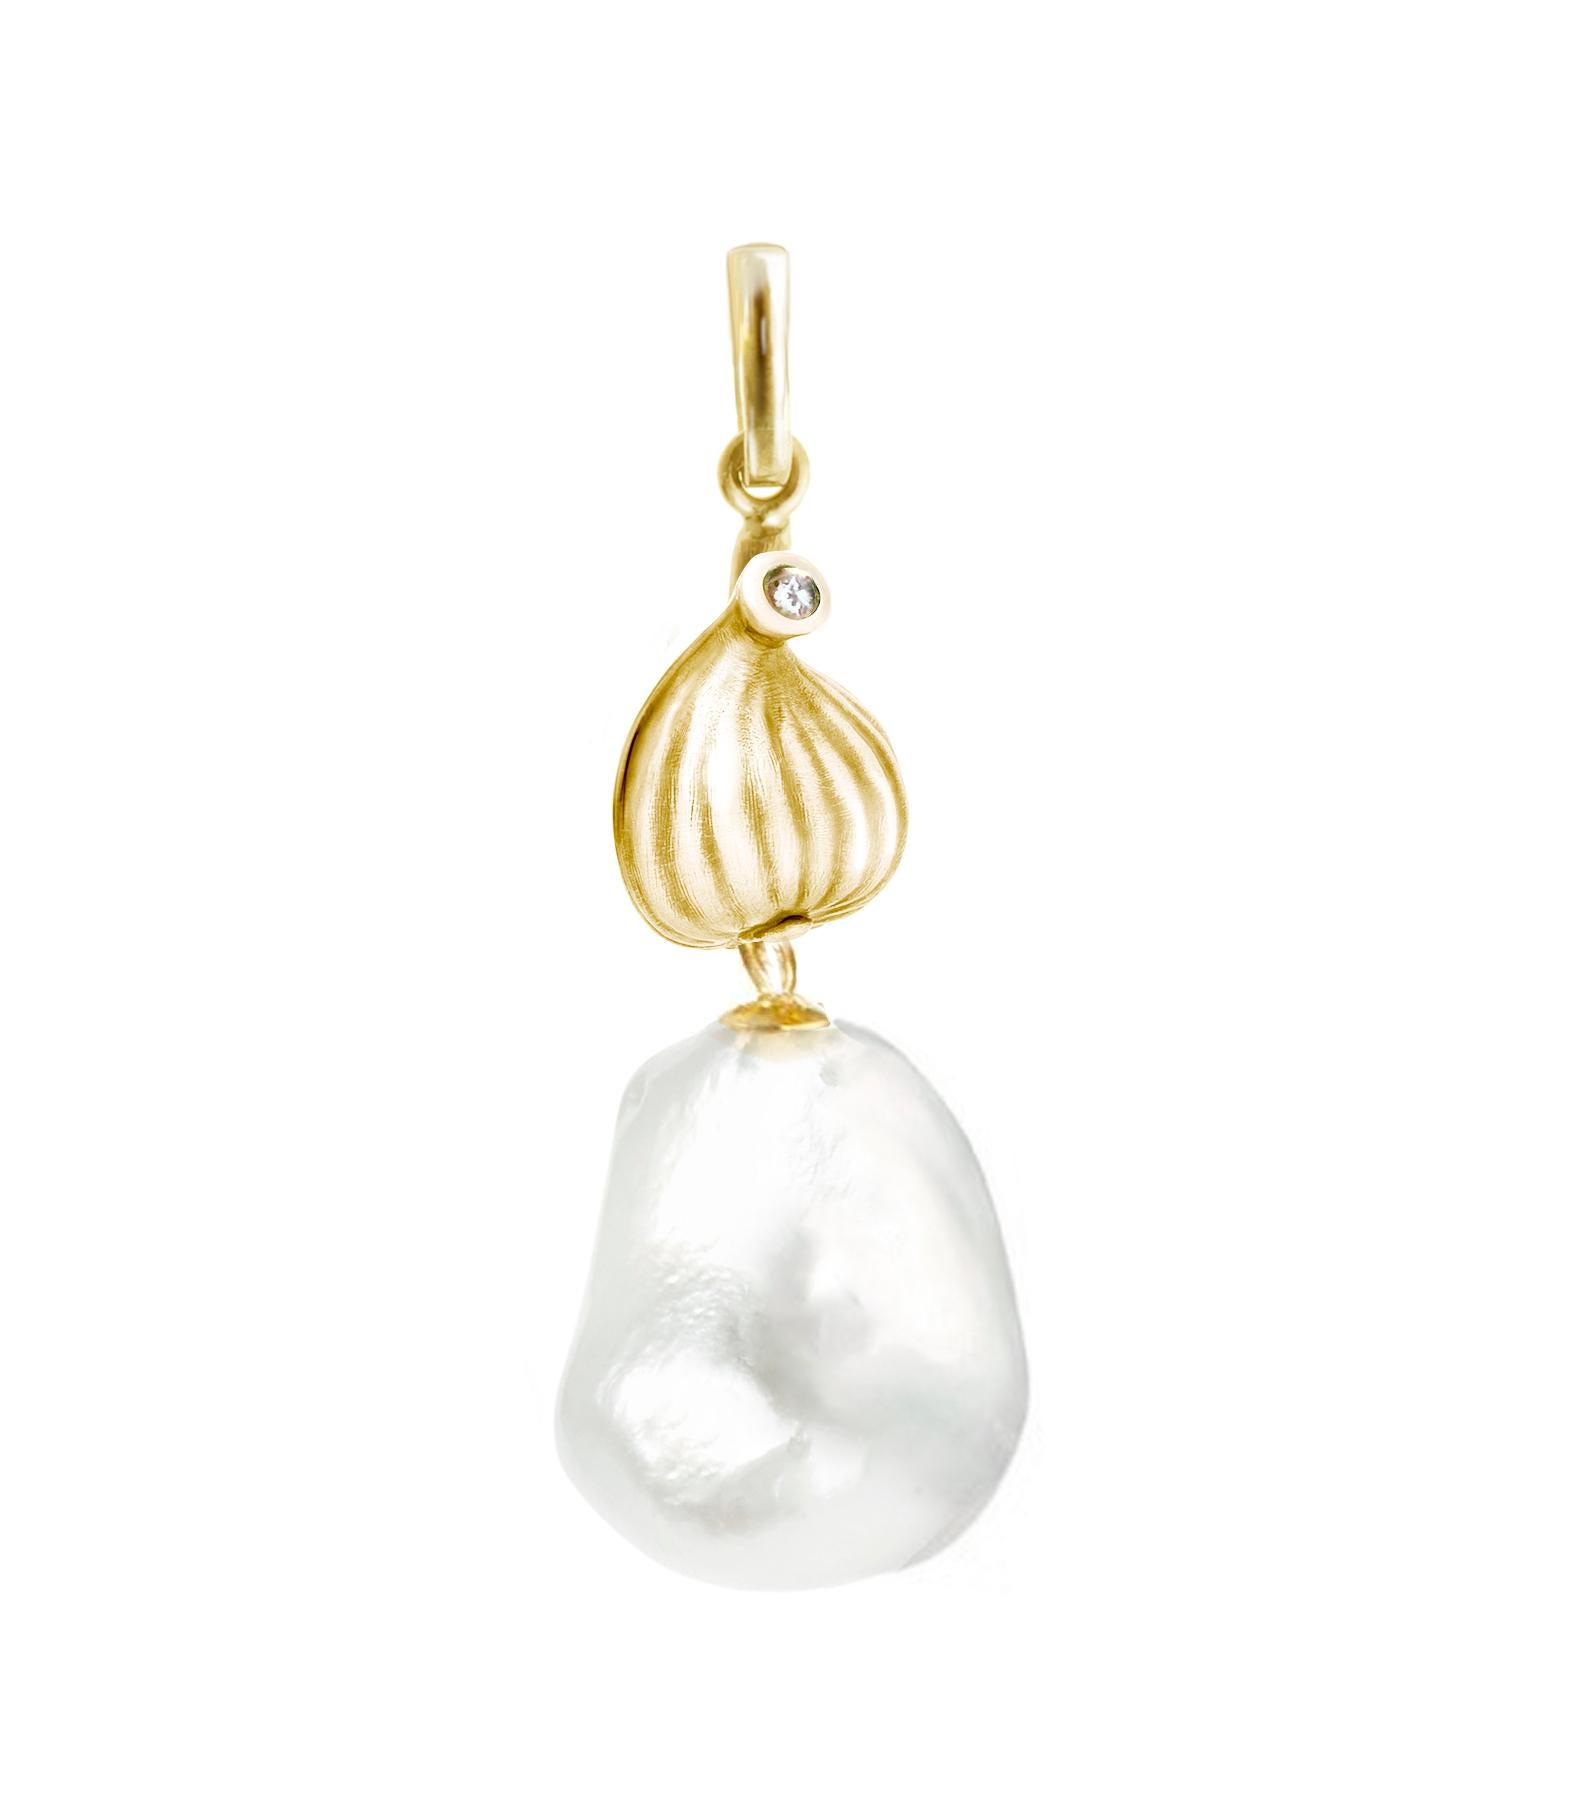 18 karat yellow gold designer pendant necklace with a detachable freshwater baroque pearl and a round diamond. The Fig collection was featured in a review in Vogue UA.

While pearls and diamonds are classic ingredients in any jewelry collection, it